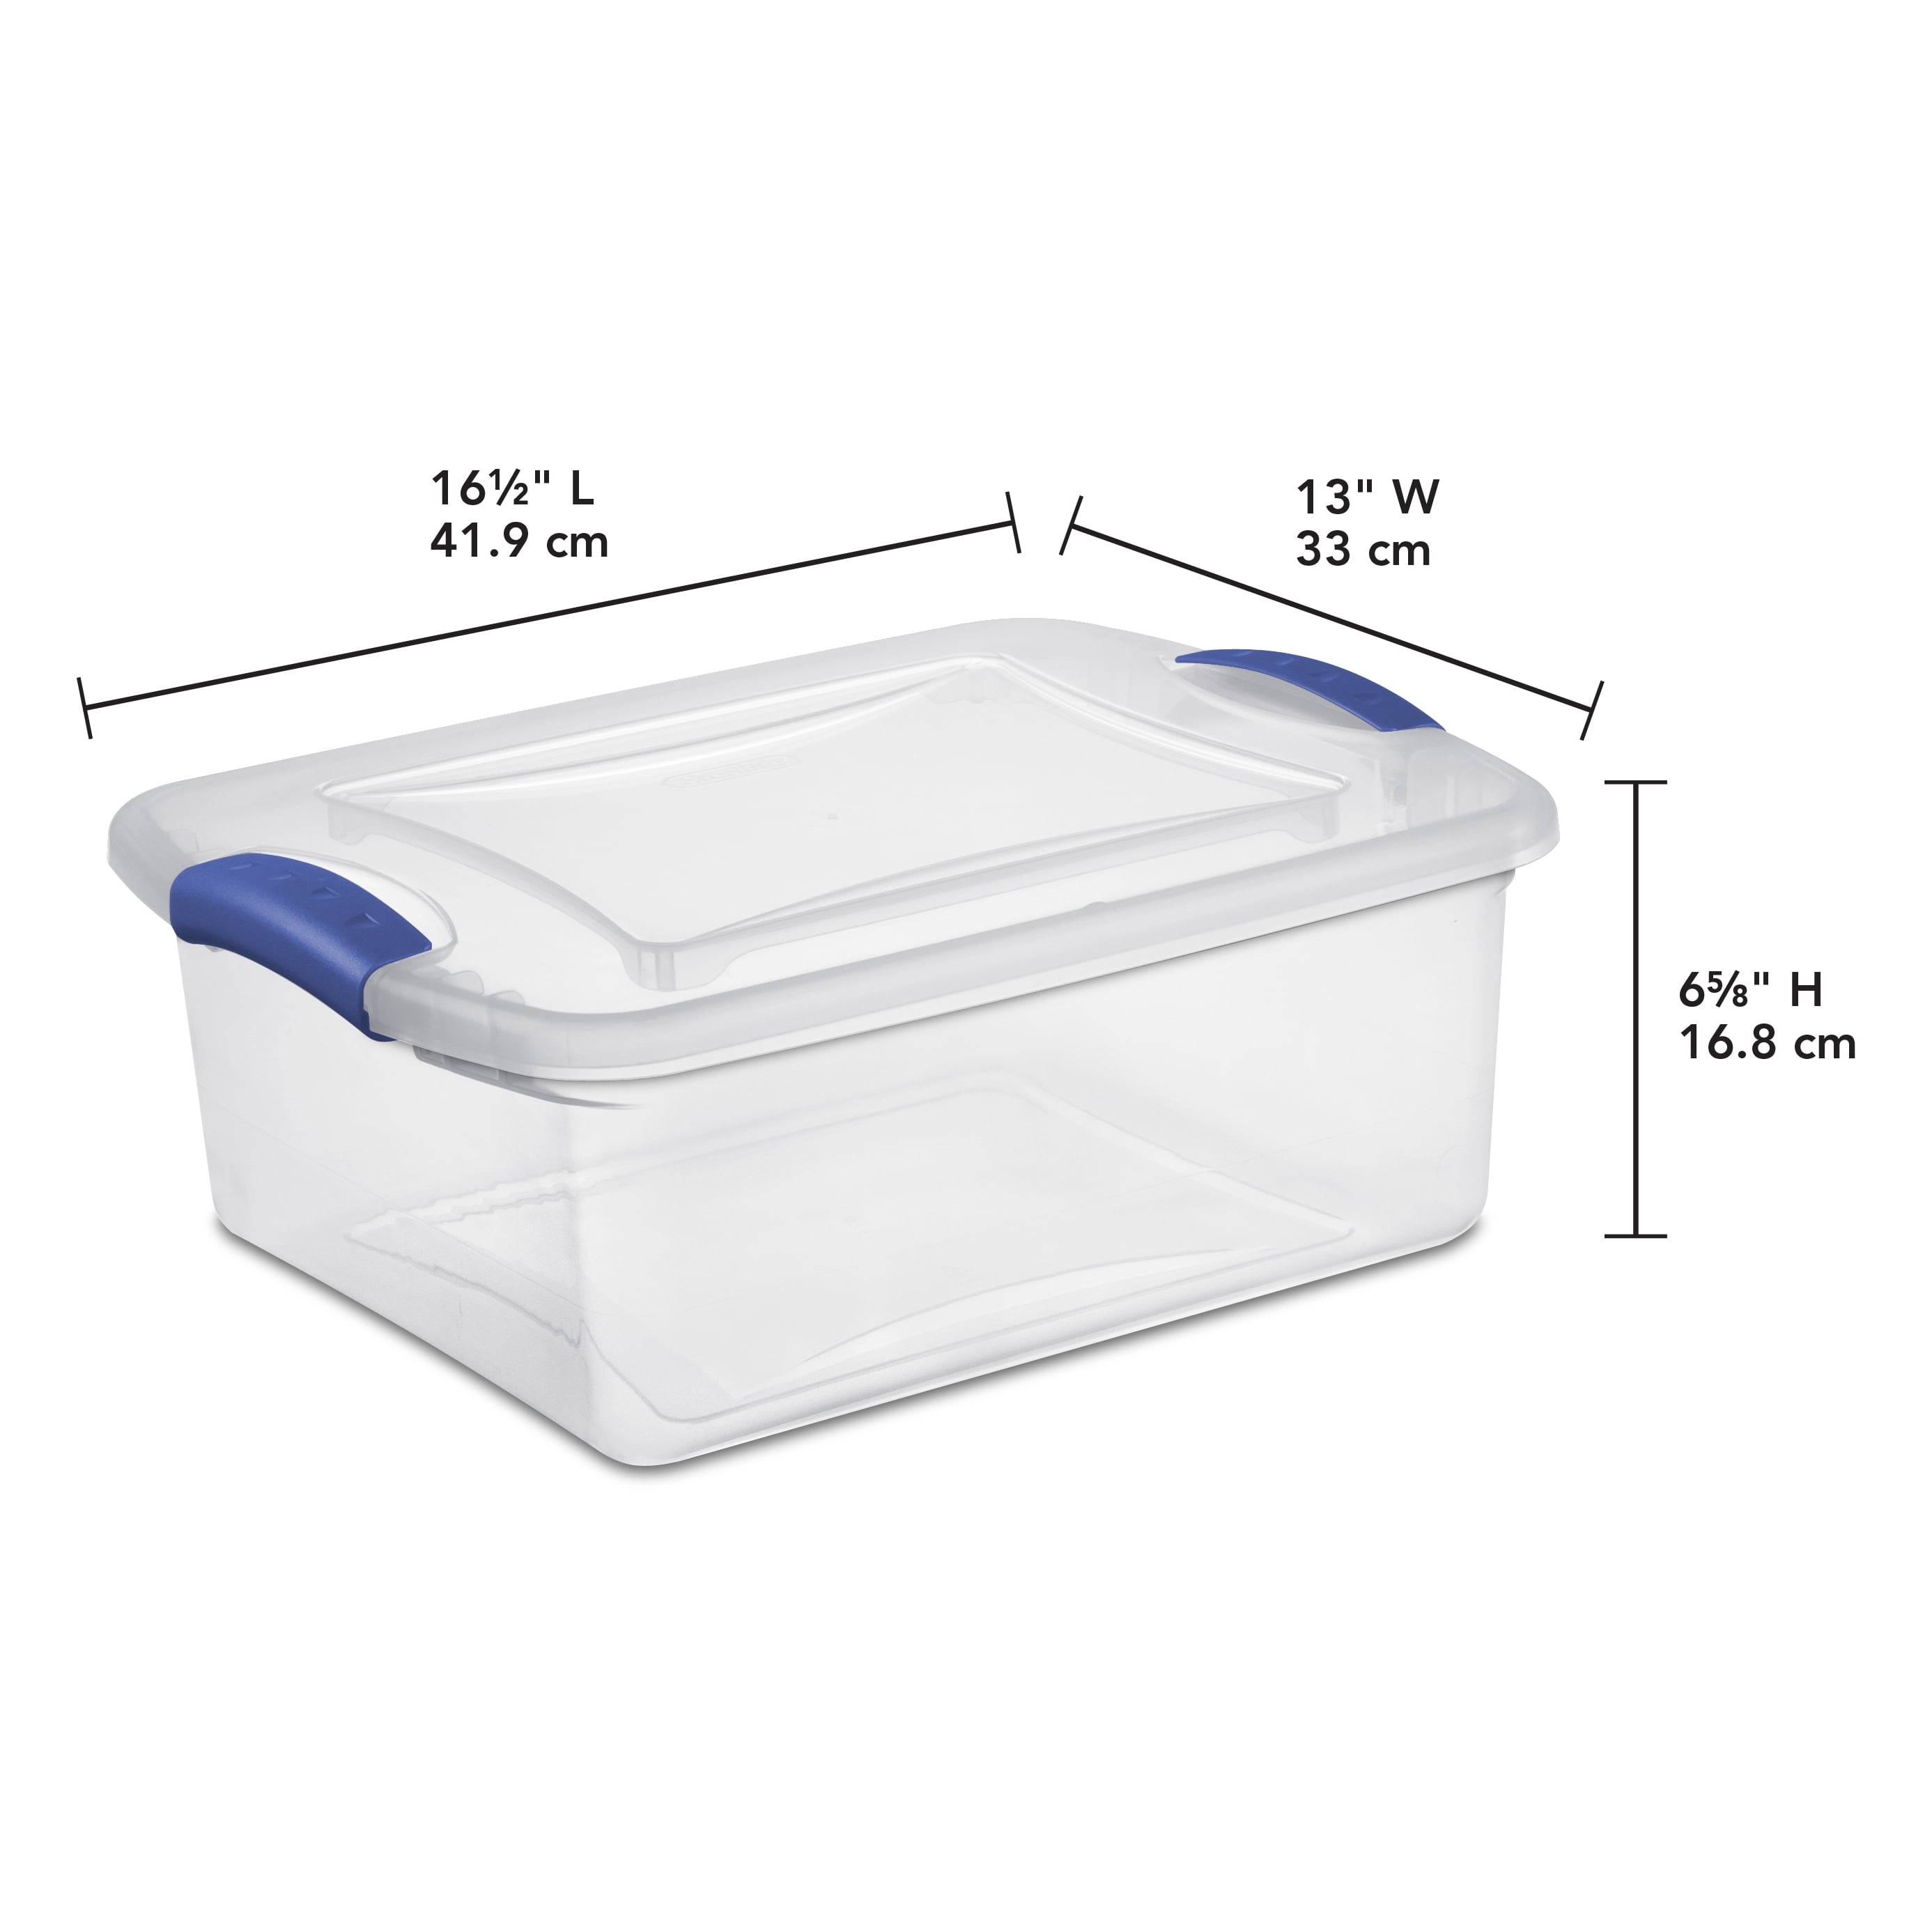 Sterilite 15 Qt Latching Storage Box, Stackable Bin with Latch Lid, Plastic  Container to Organize Clothes in Closet, Clear with Blue Lid, 24-Pack